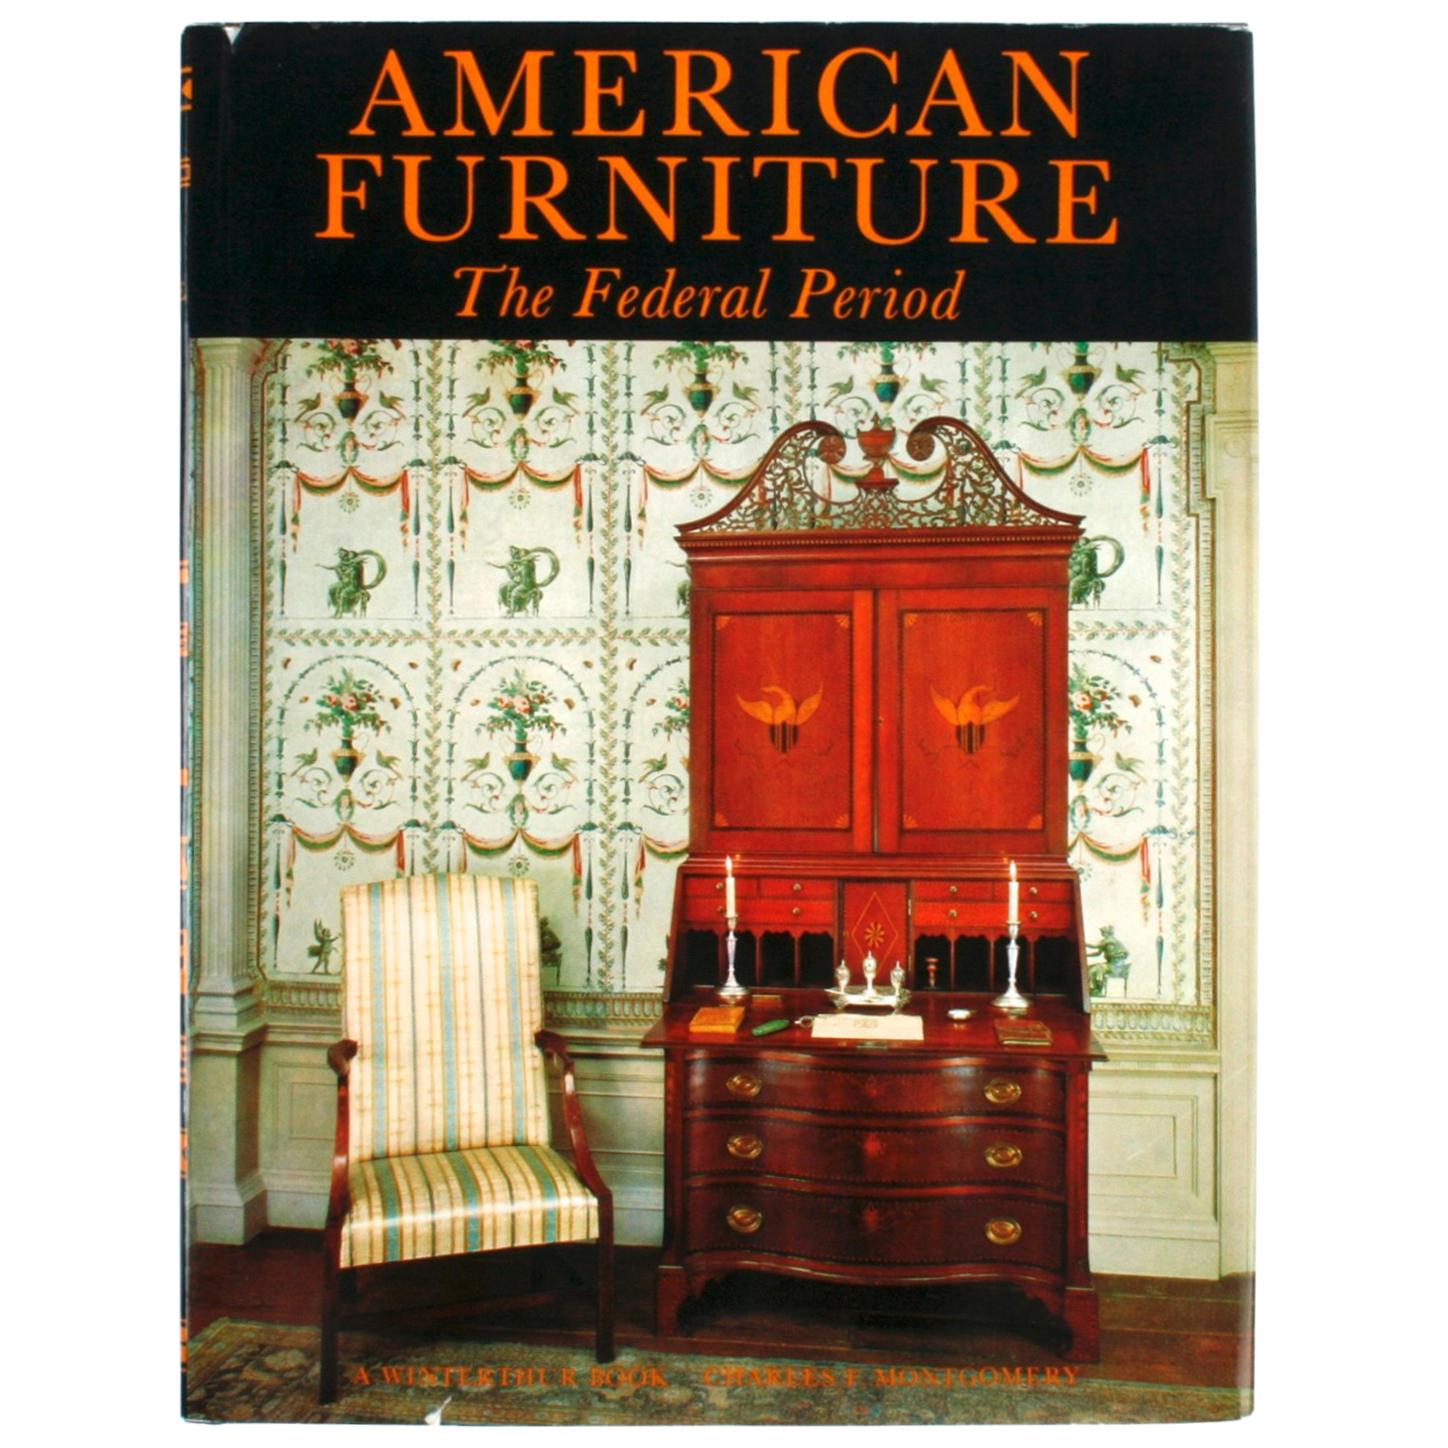 American Furniture, The Federal Period by Charles F. Montgomery